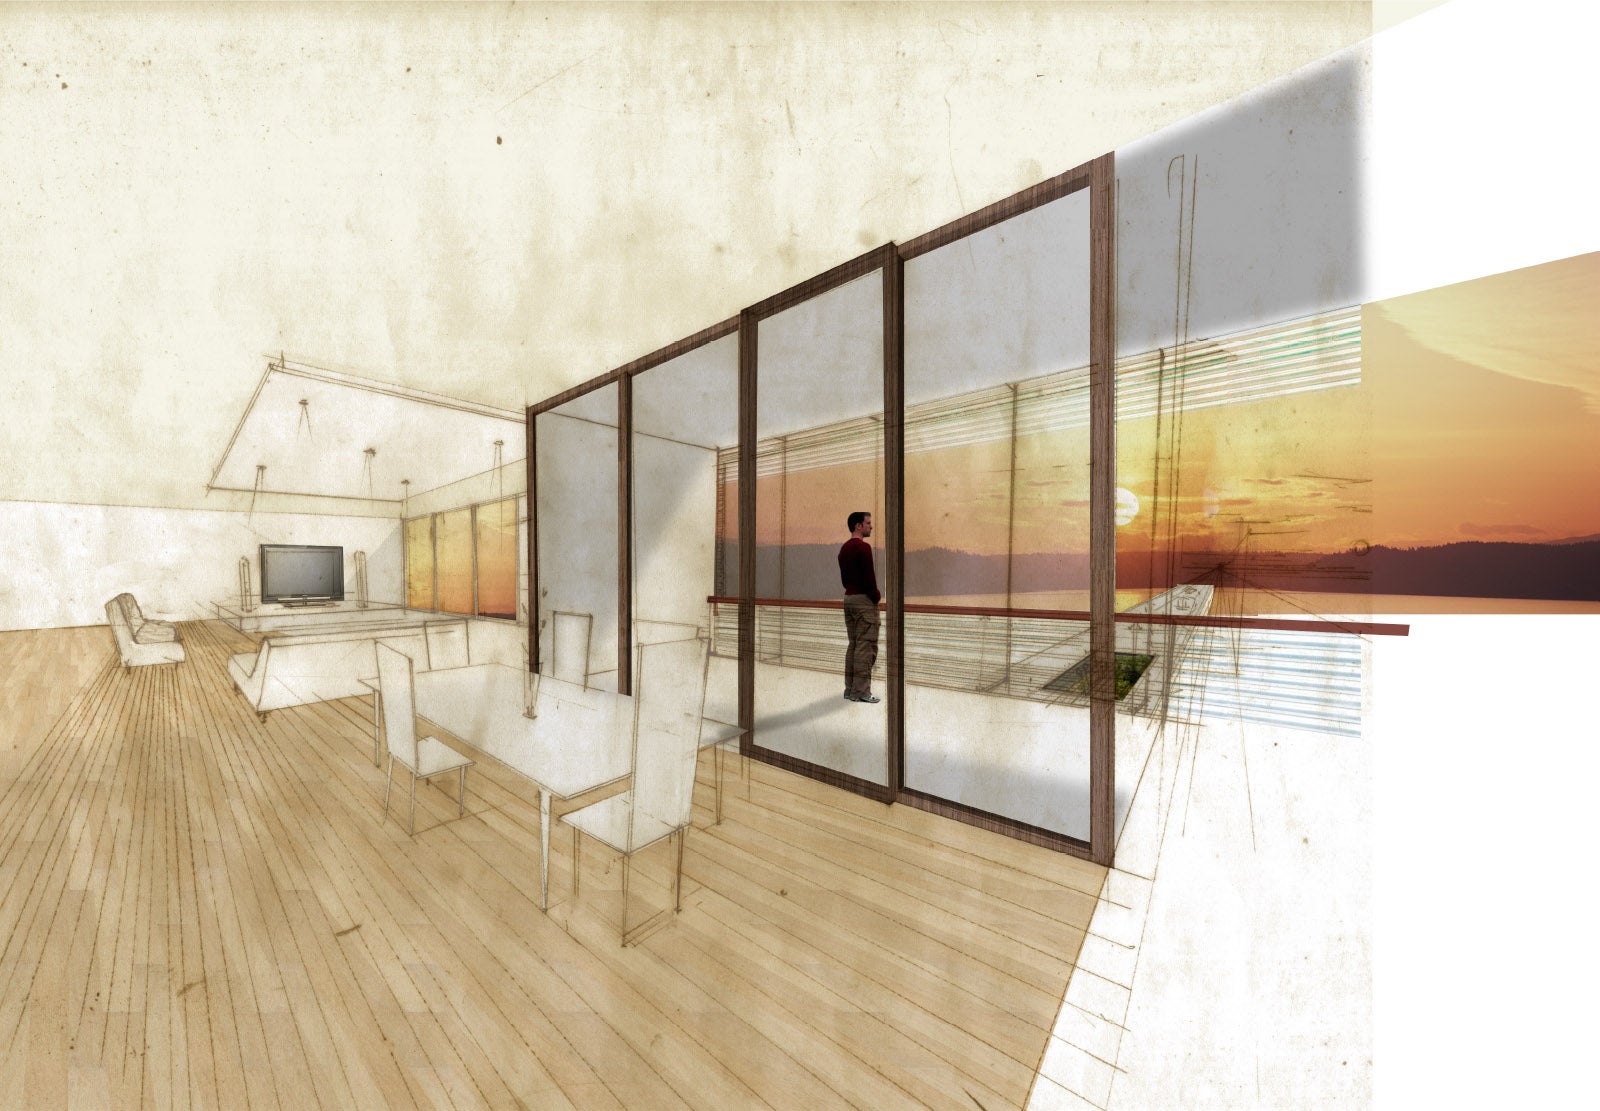 An interior rendering of her building design.The style is minimal, colors are desaturated. The view looks out a balcony.